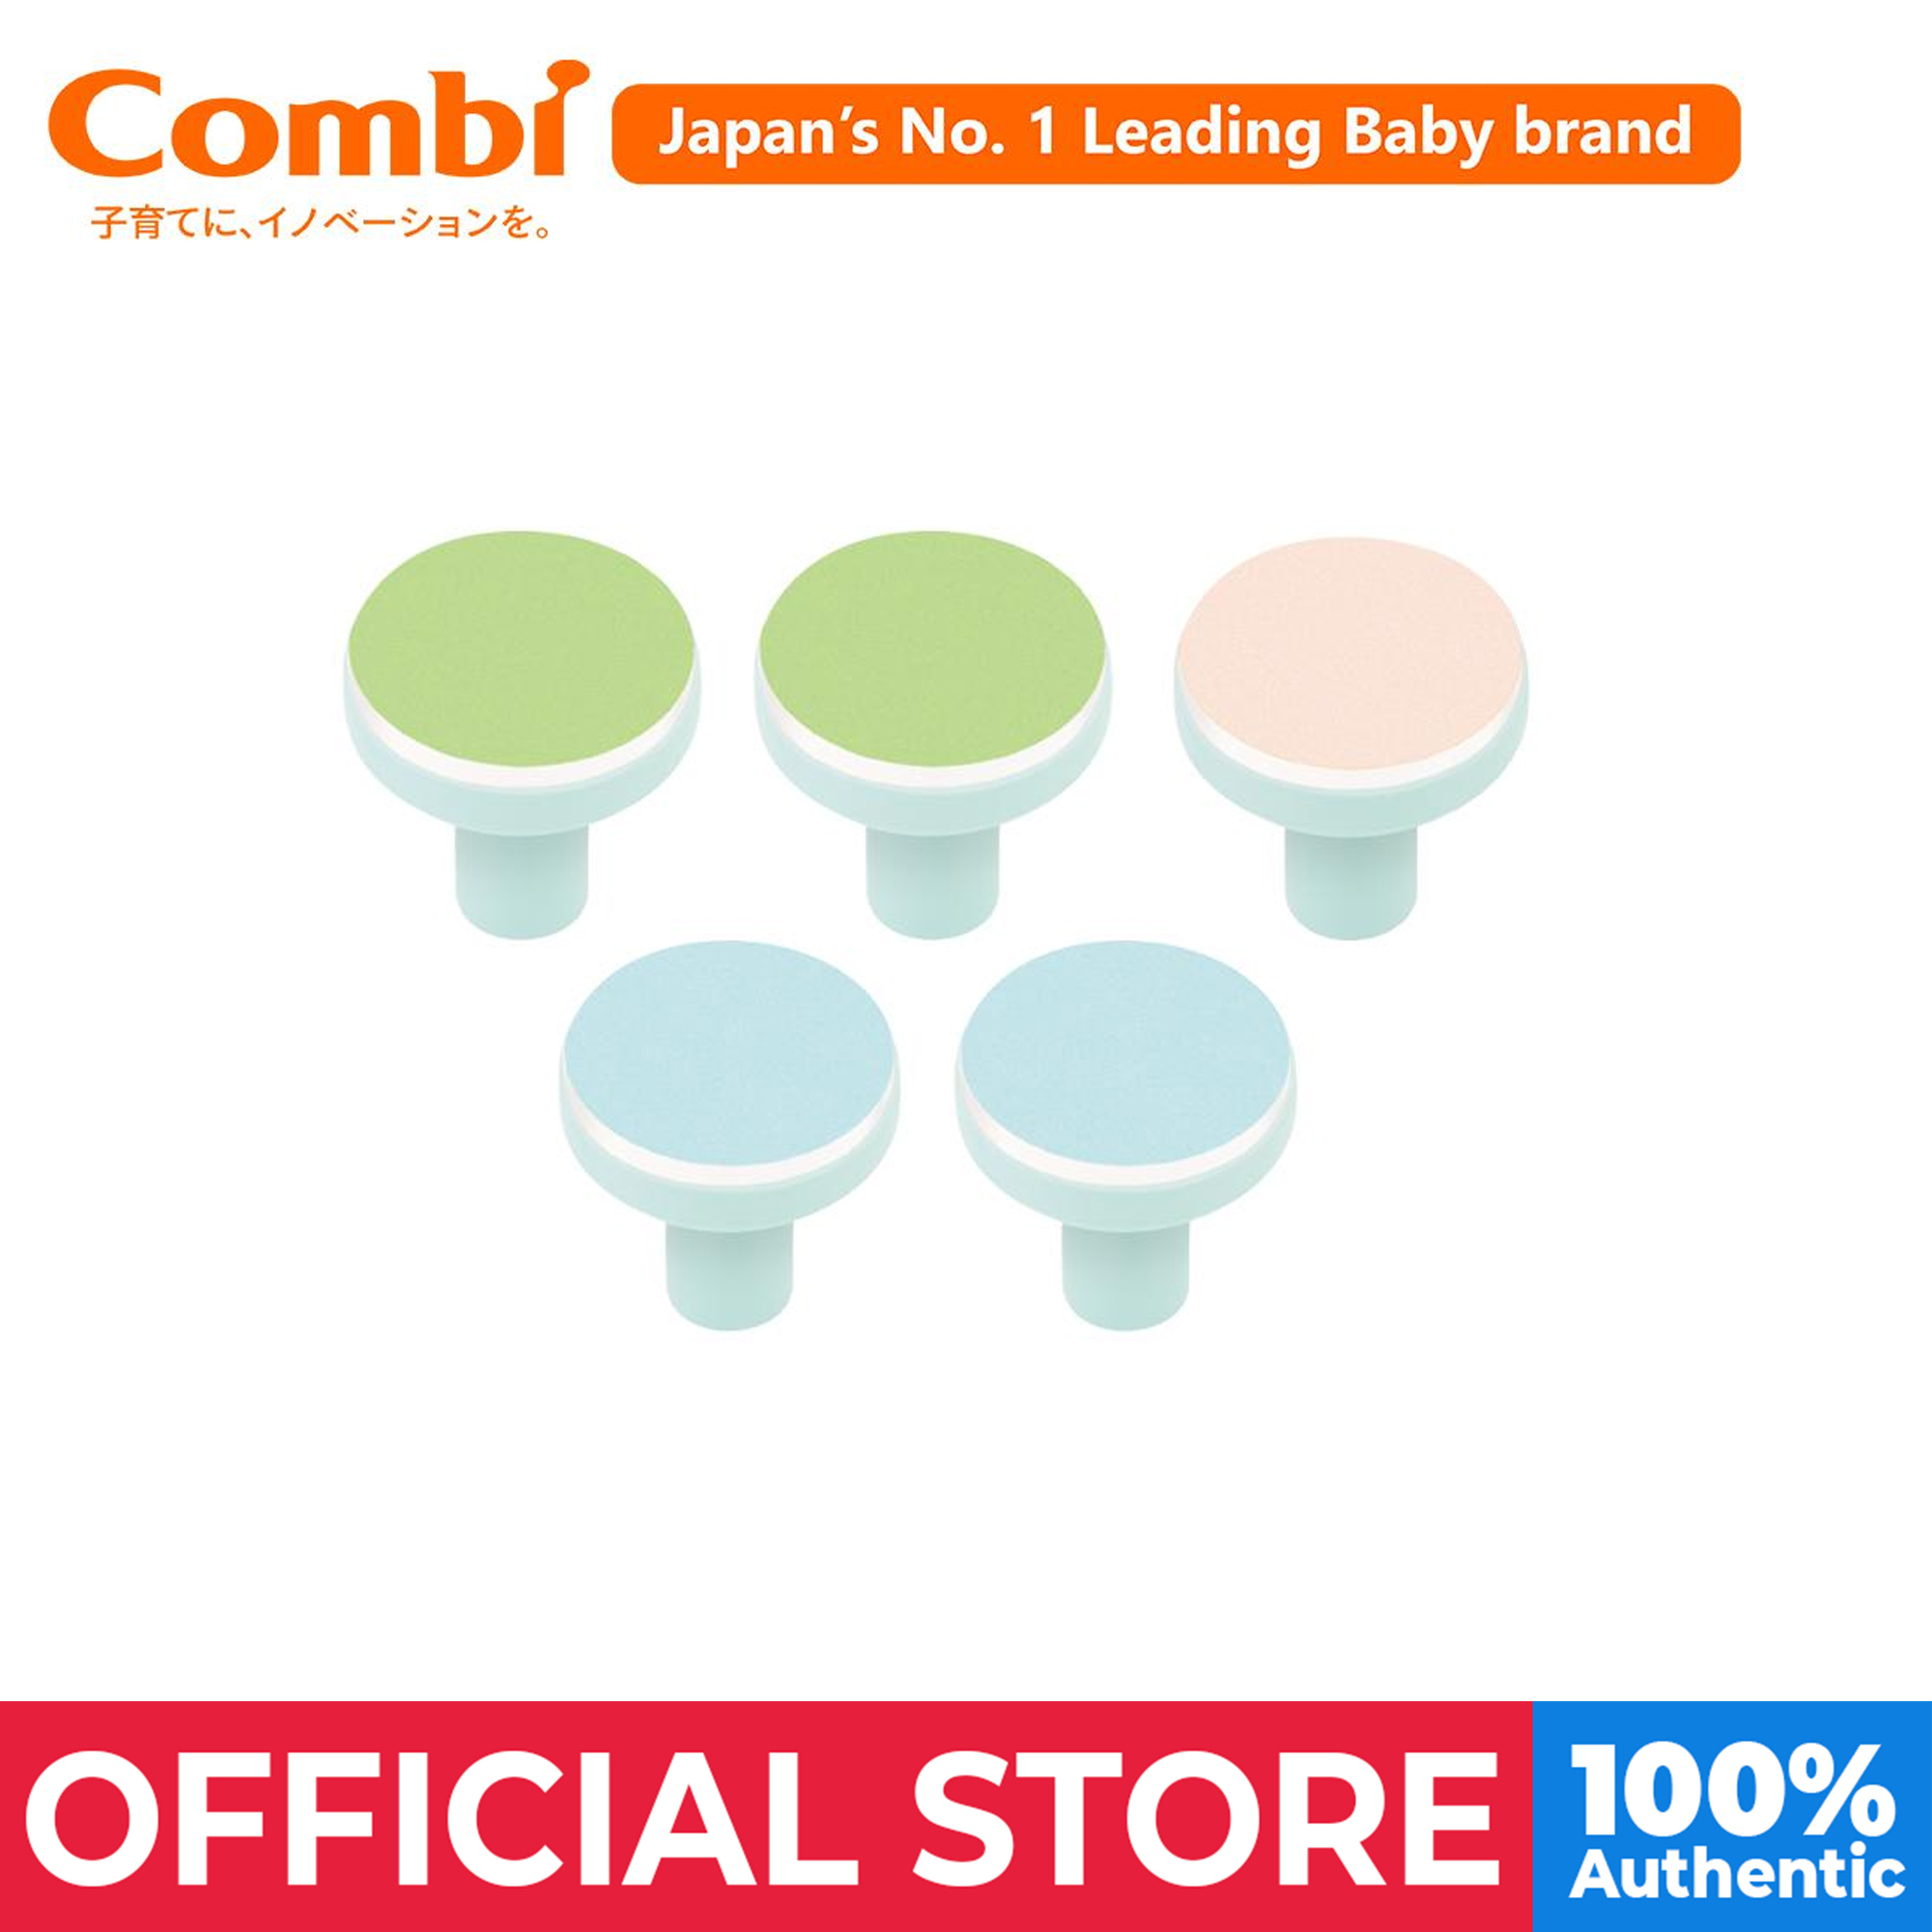 combi baby nail trimmer